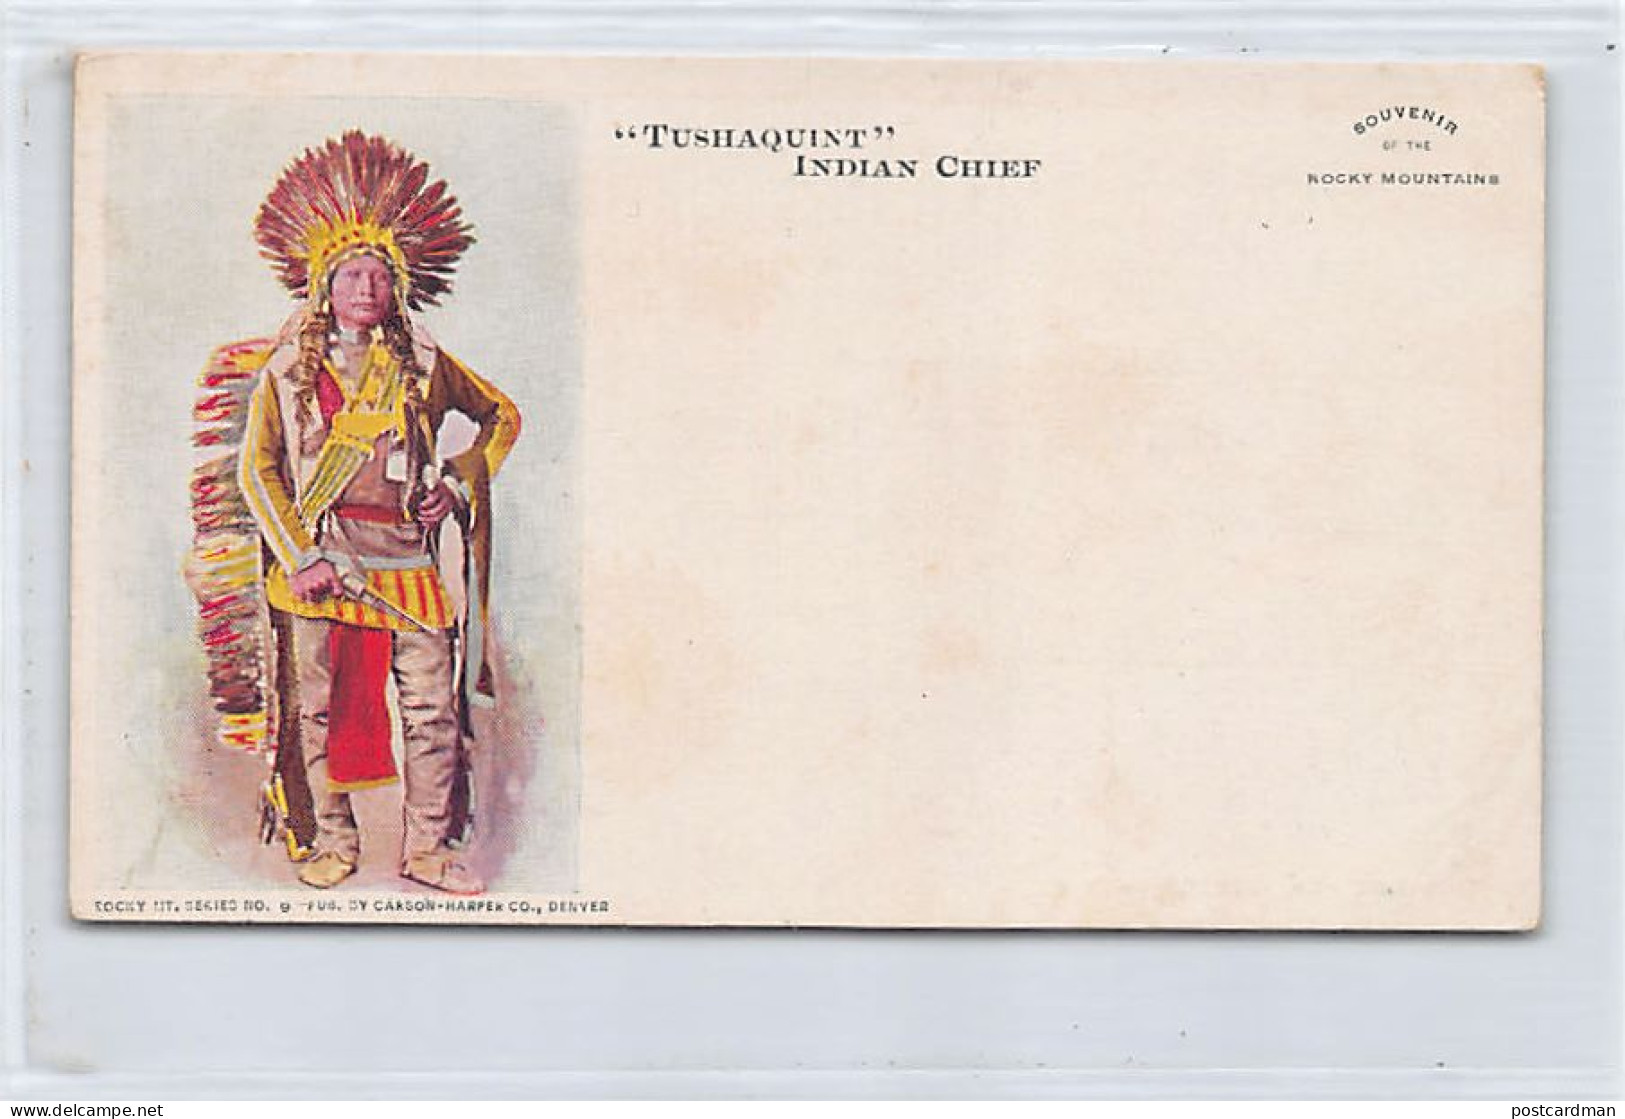 Usa - Native Americana - Tushaquint Indian Chief - PRIVATE MAILING CARD - Publ. Carson-Harper Co. Rocky Mt. Series - Native Americans